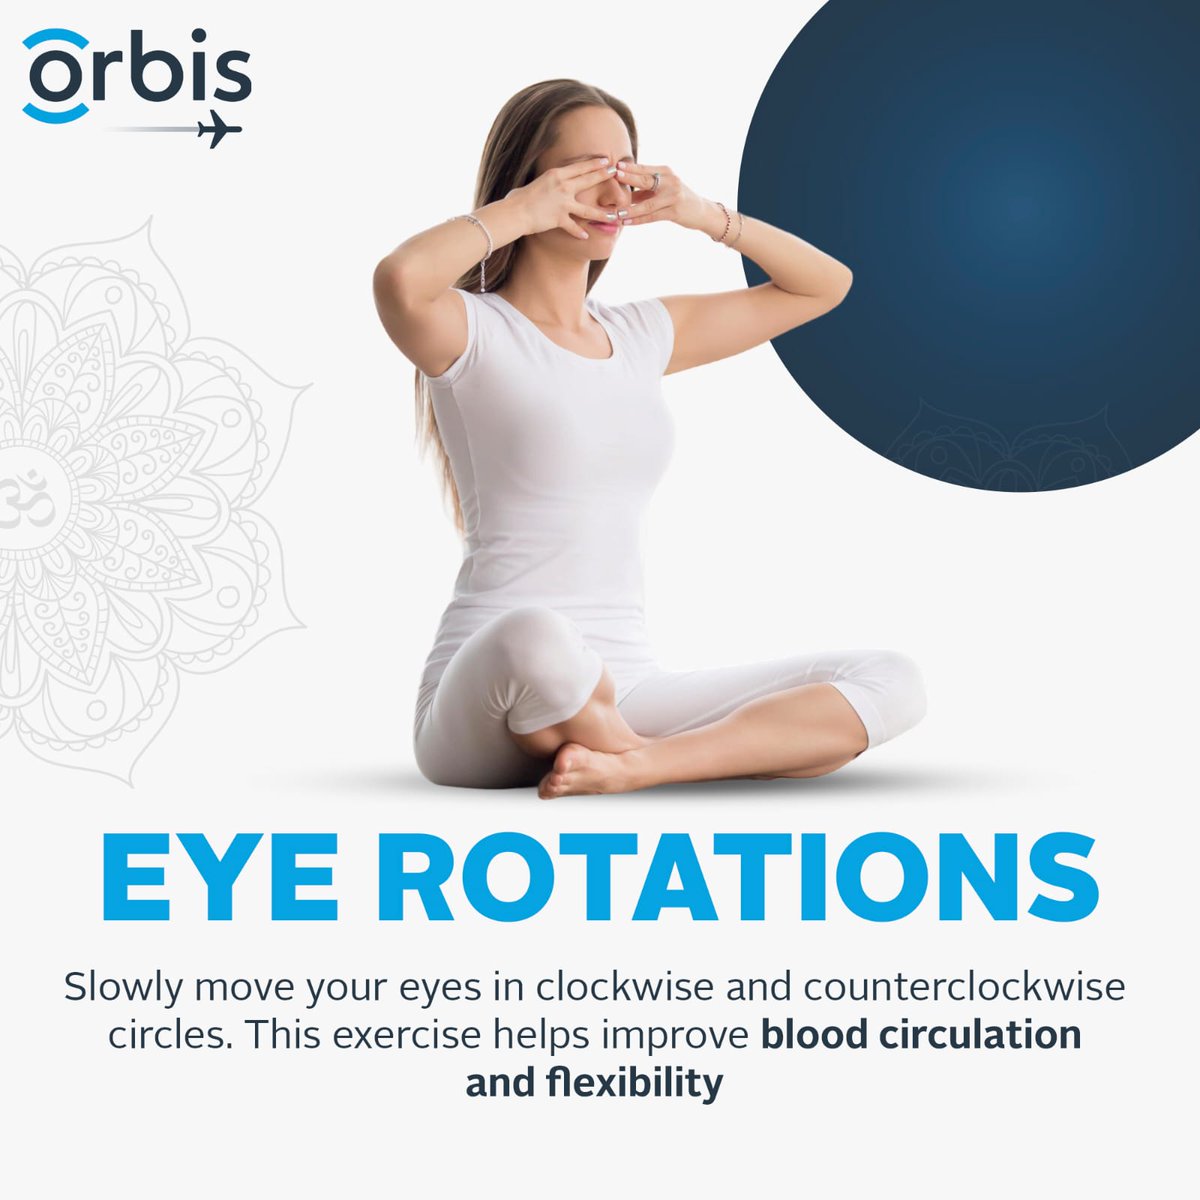 🧘‍♀️This #InternationalYogaDay, open your eyes to the wonders of yoga 👀

Let’s experience its transformative power in maintaining healthy eyesight and bringing clarity of thought and action.

#YogaForEyeHealth #HealthyEyes #ClearVision #EyeCareCommunity

@OrbisIntl